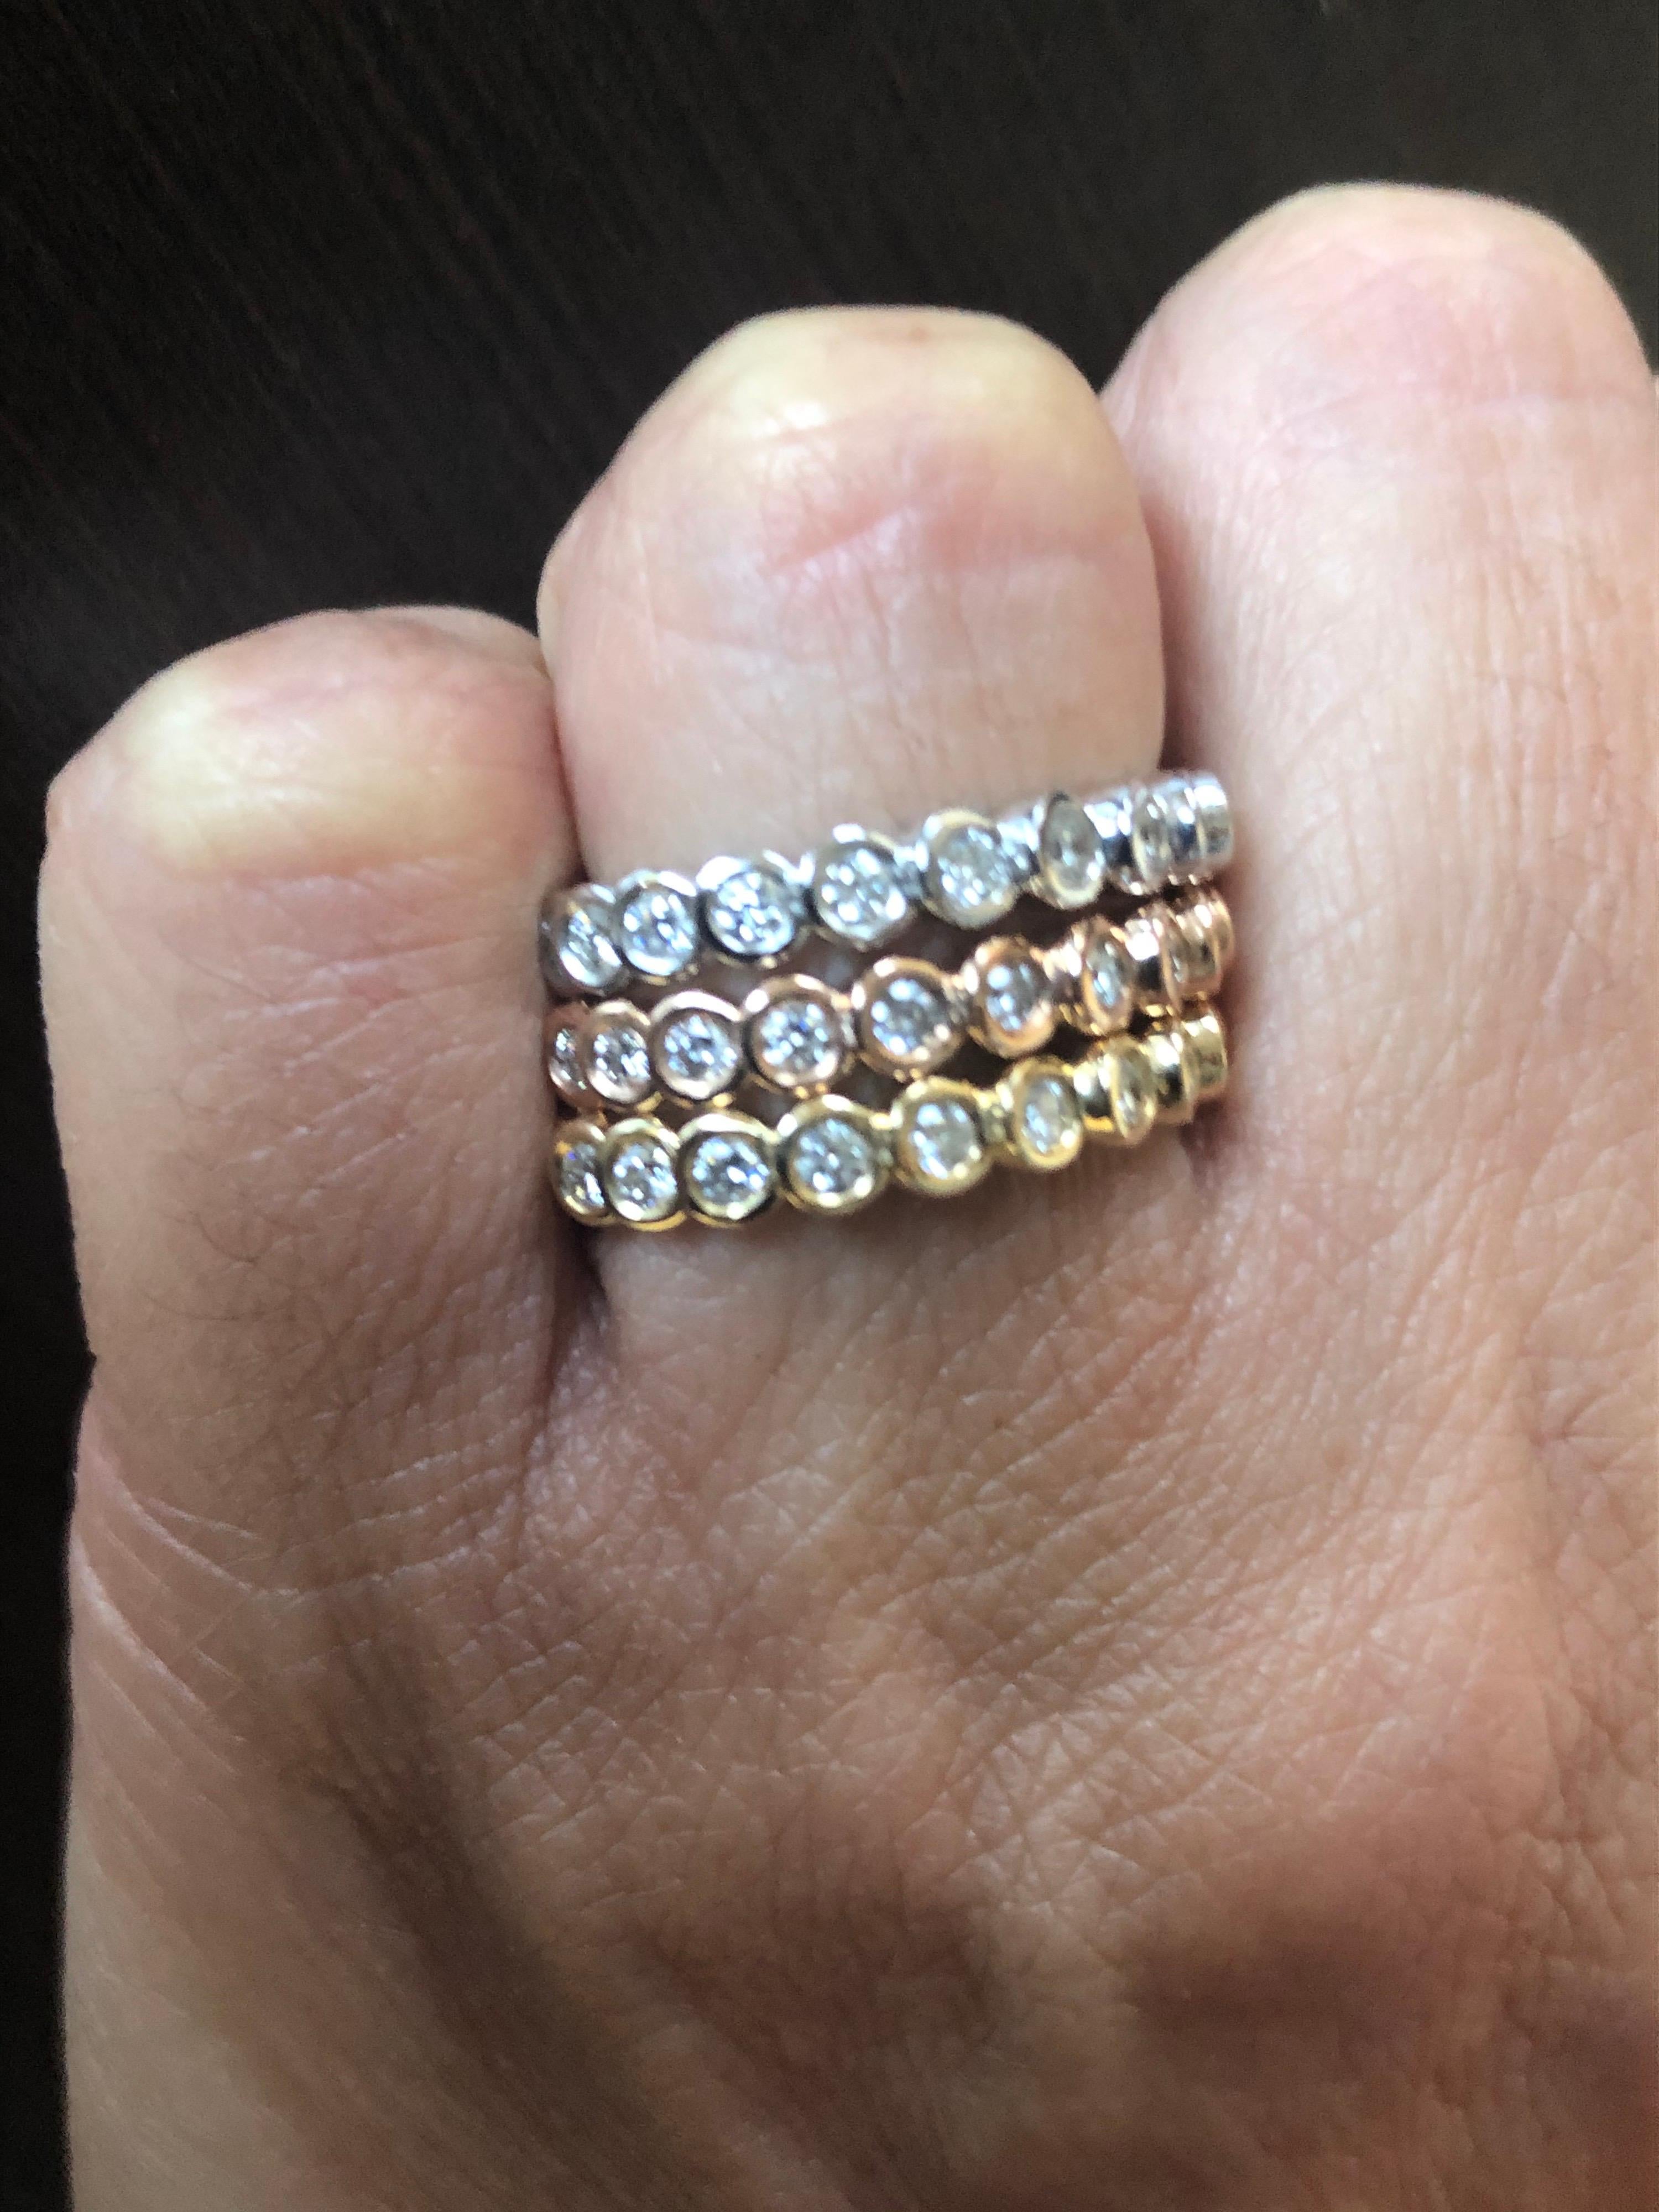 14K White, yellow, and rose gold bezel set rings set 3/4 around eternity. The total weight of each ring is 0.51 carats. Each ring is set with 17 stones. The color of the stones are G-H, the clarity is SI1. The rings are sold as a set.